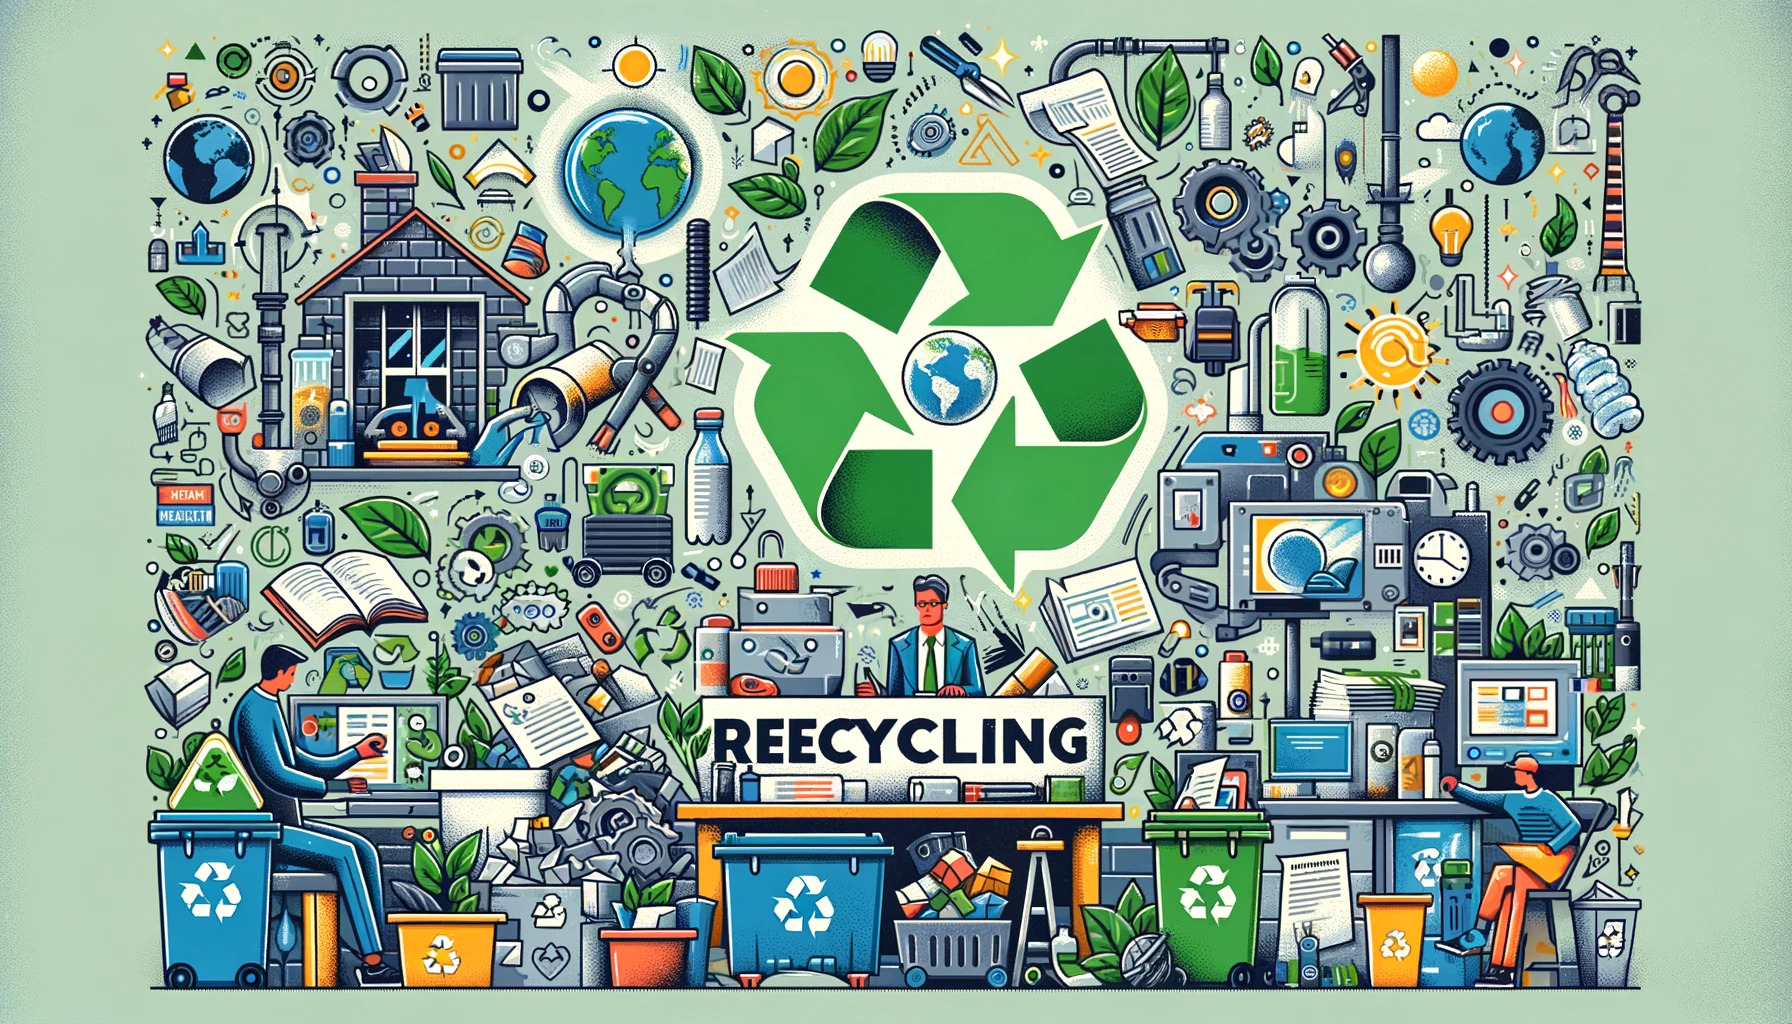 SUSTAINABILITY AND RECYCLING